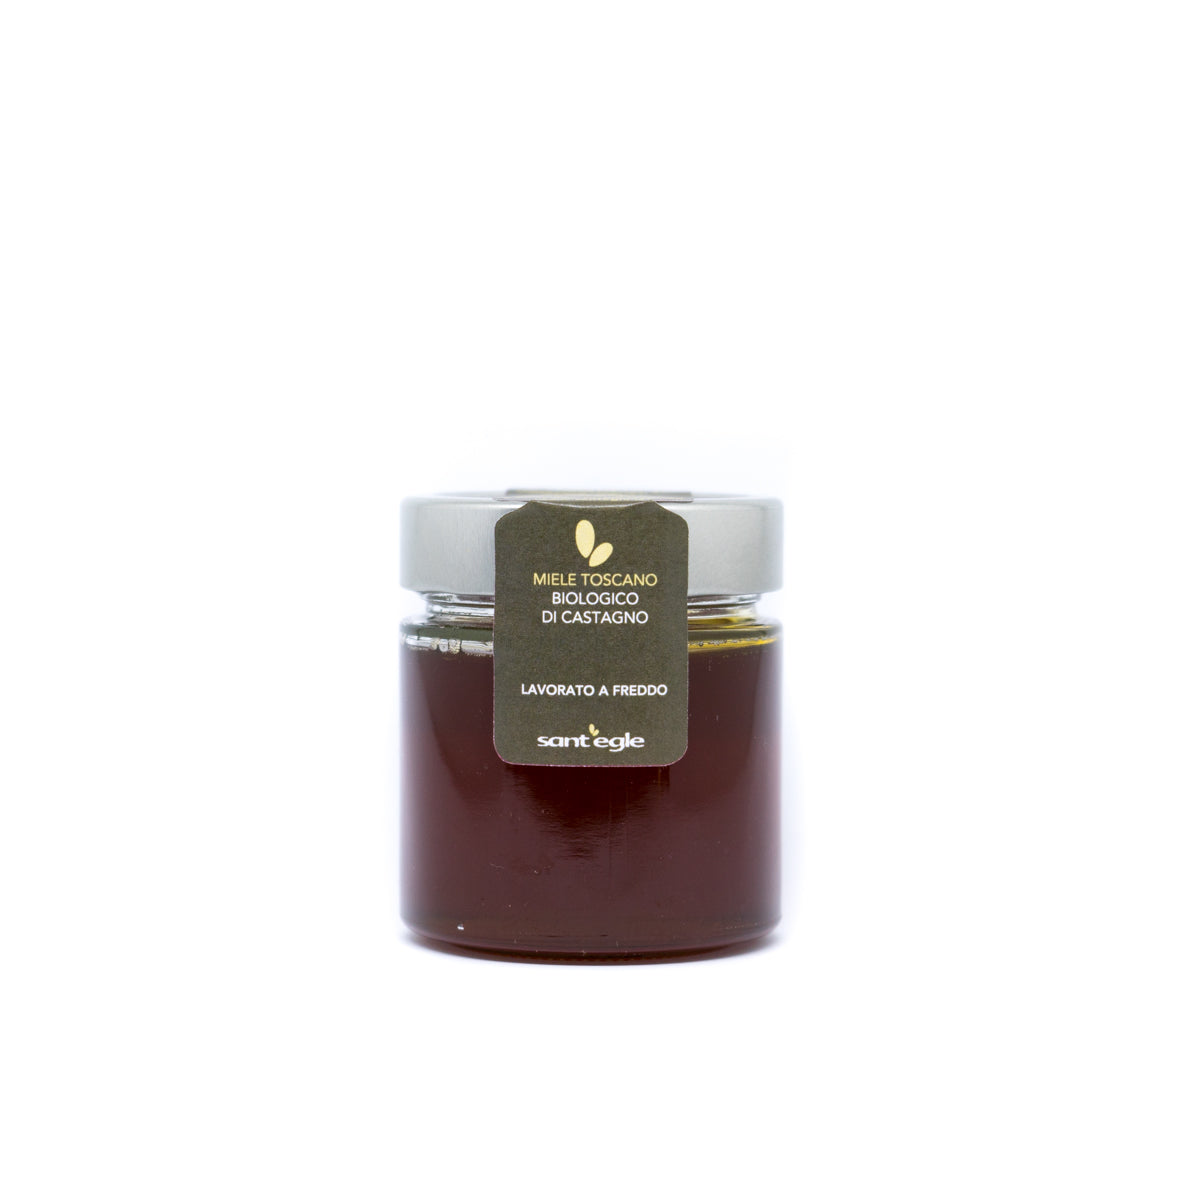 Raw and unfiltered organic honey